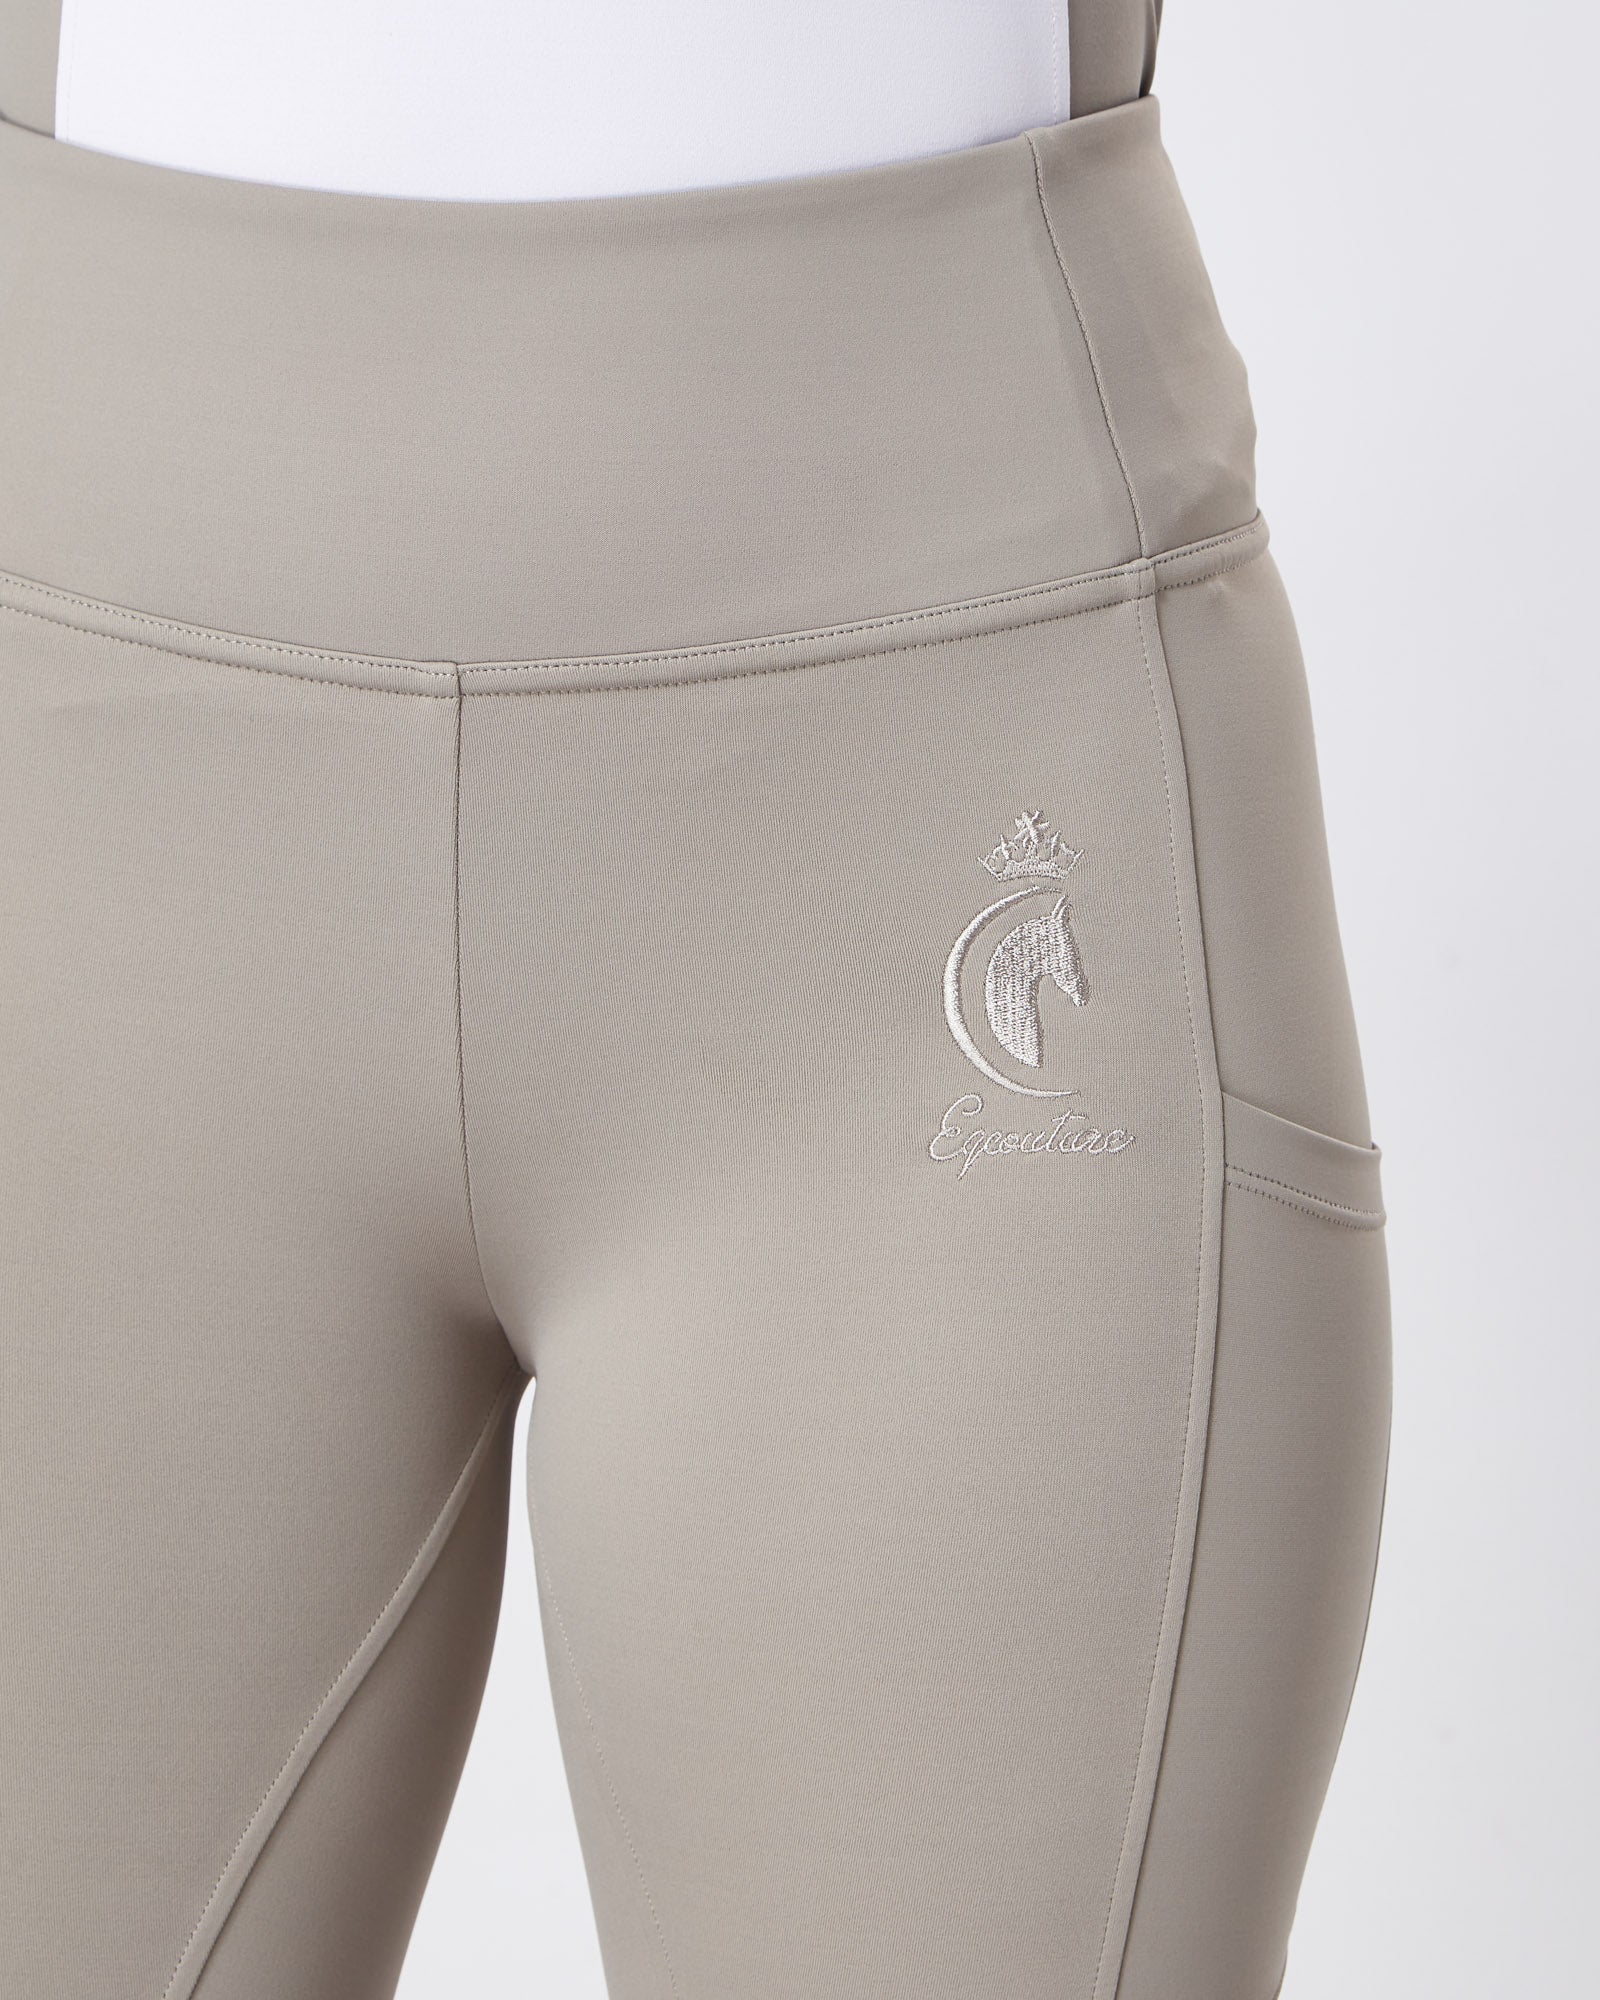 Competition Riding Leggings / Tights - No Grip - SHOWJUMPING STONE